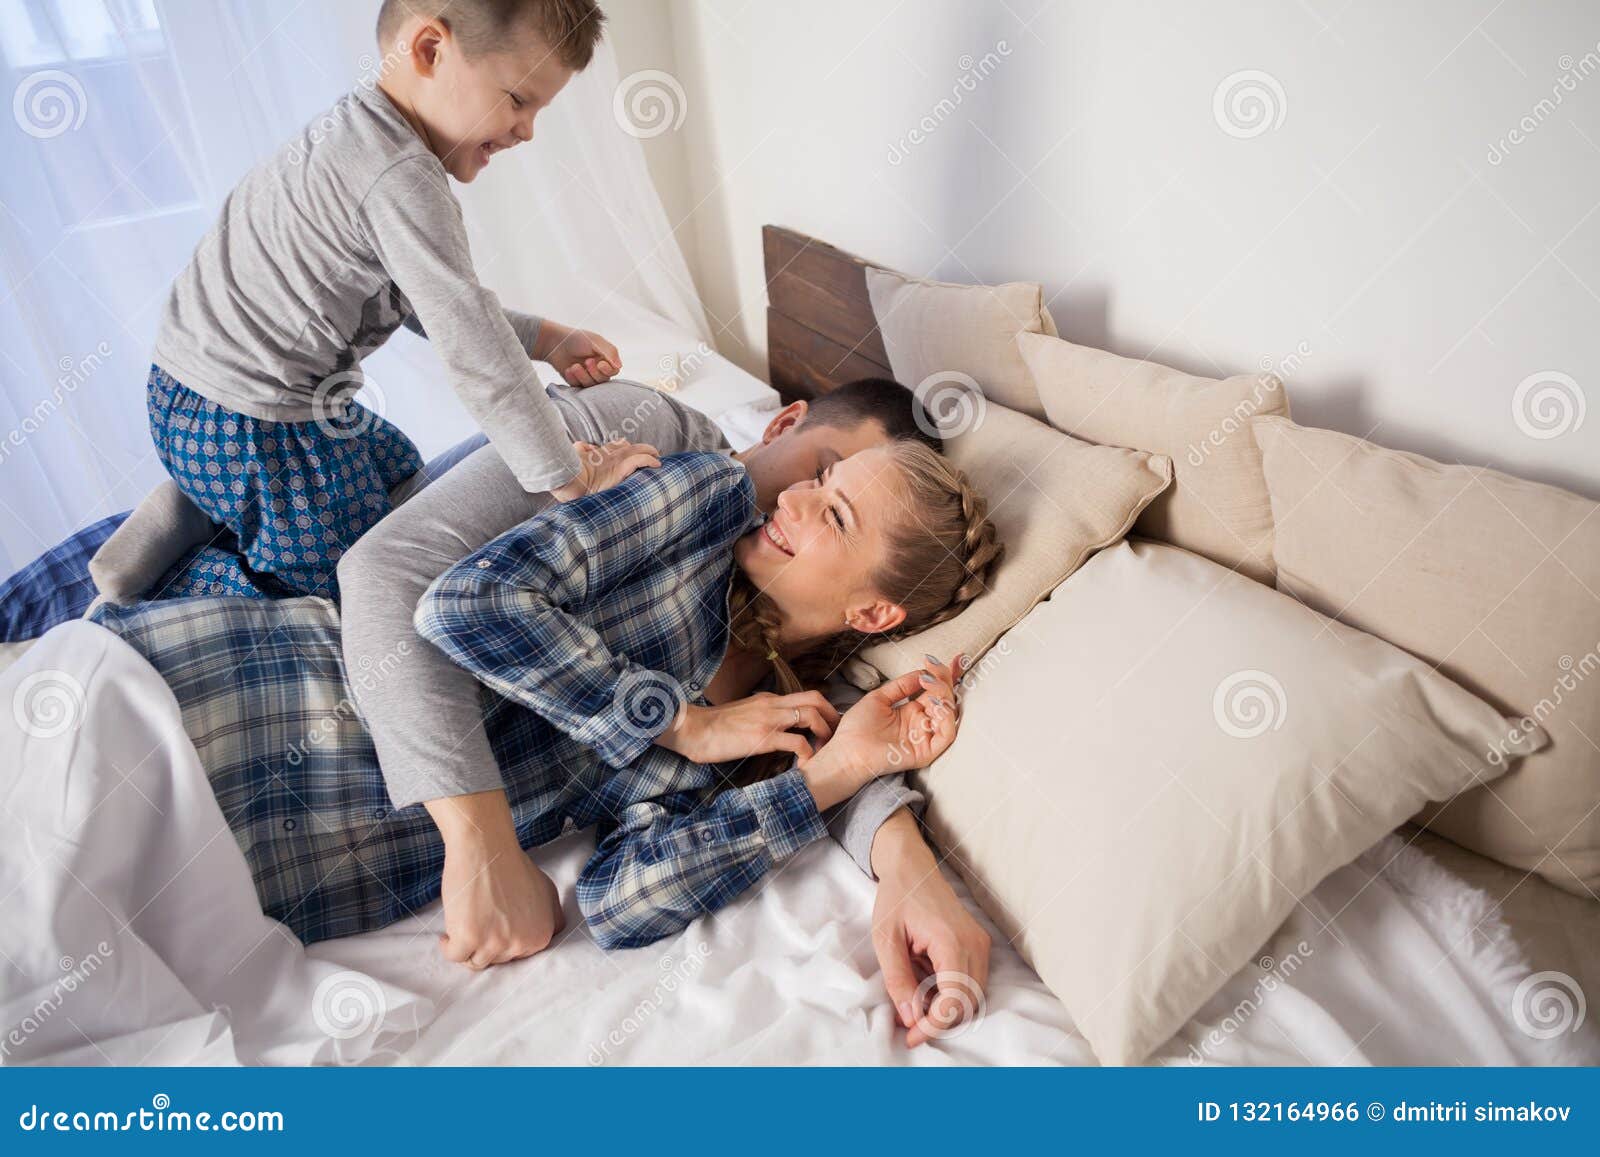 Mom Dad and Young Son in the Bedroom after Sleeping House Stock Photo